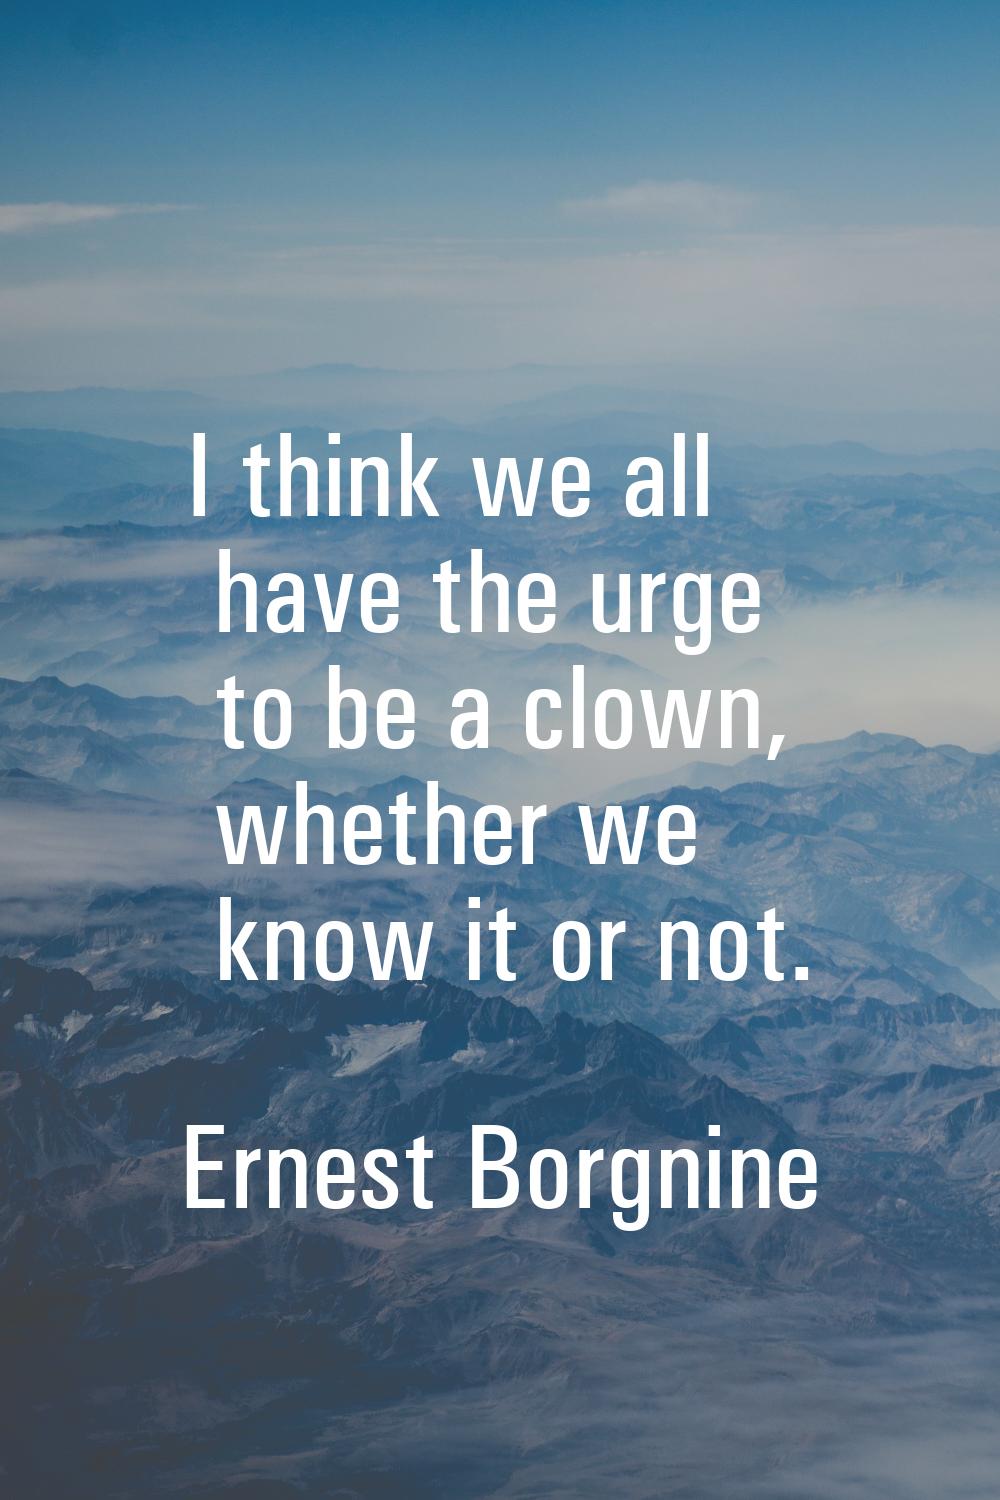 I think we all have the urge to be a clown, whether we know it or not.